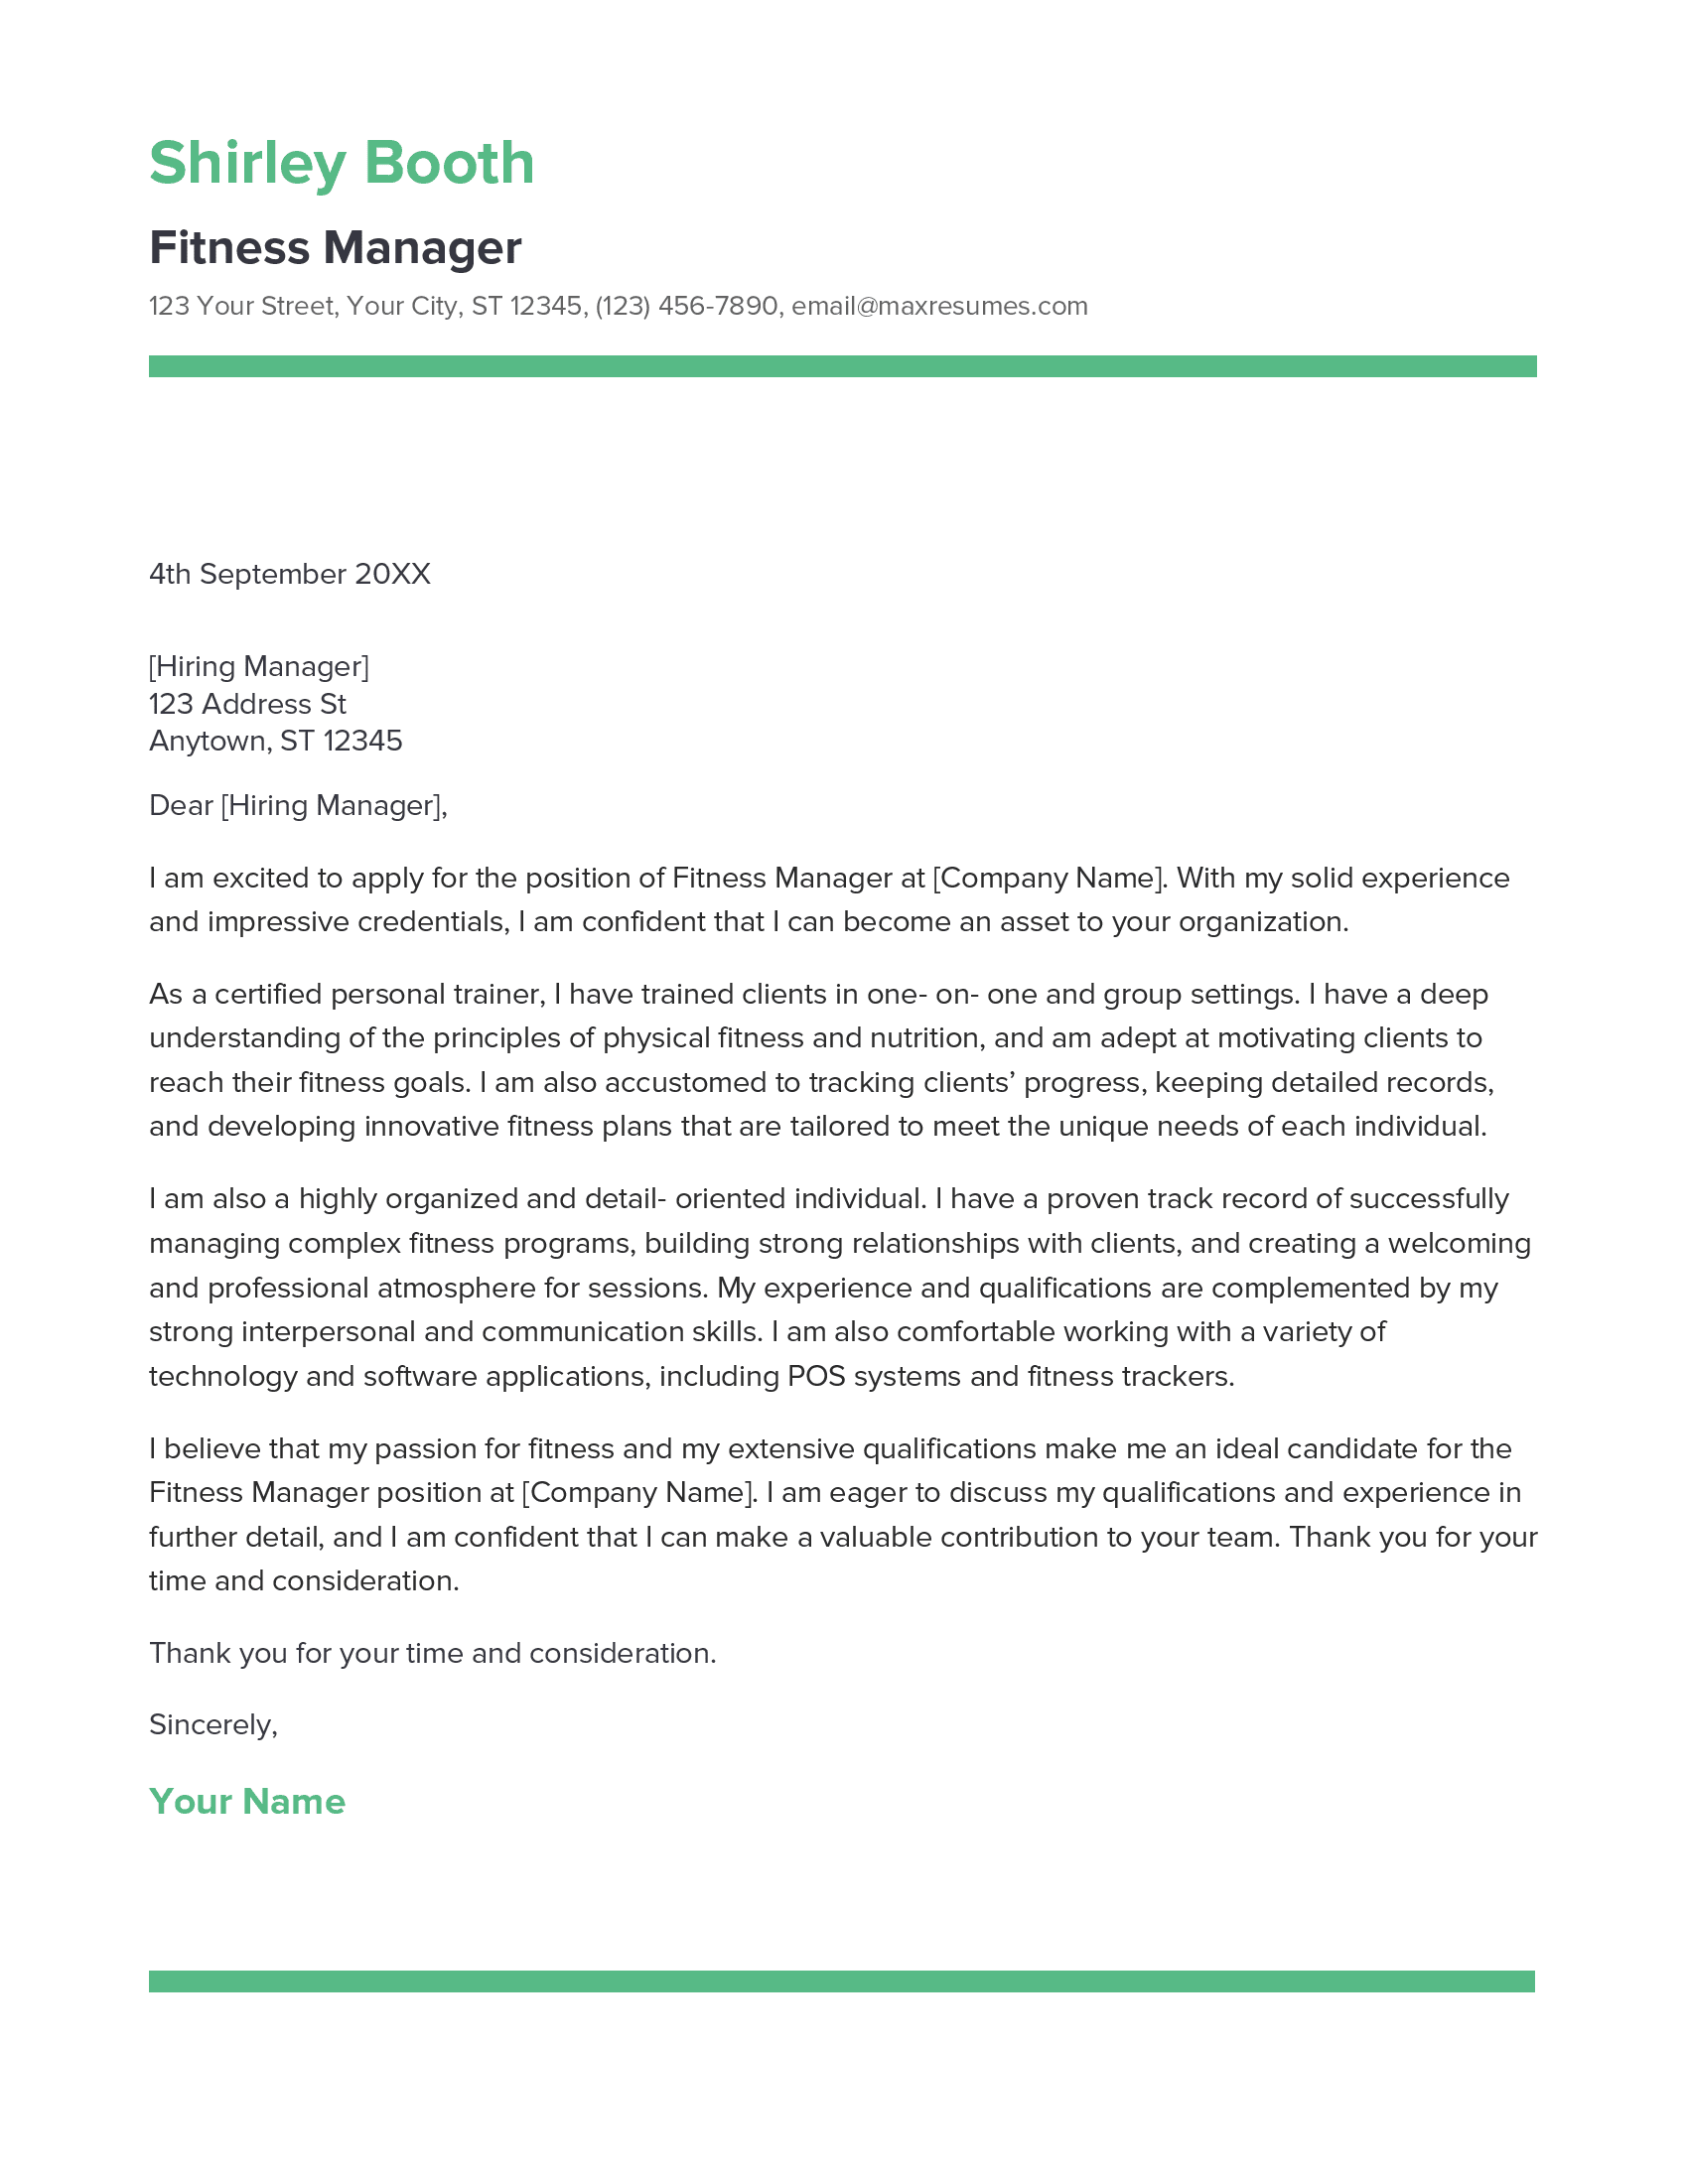 Fitness Manager Cover Letter Example